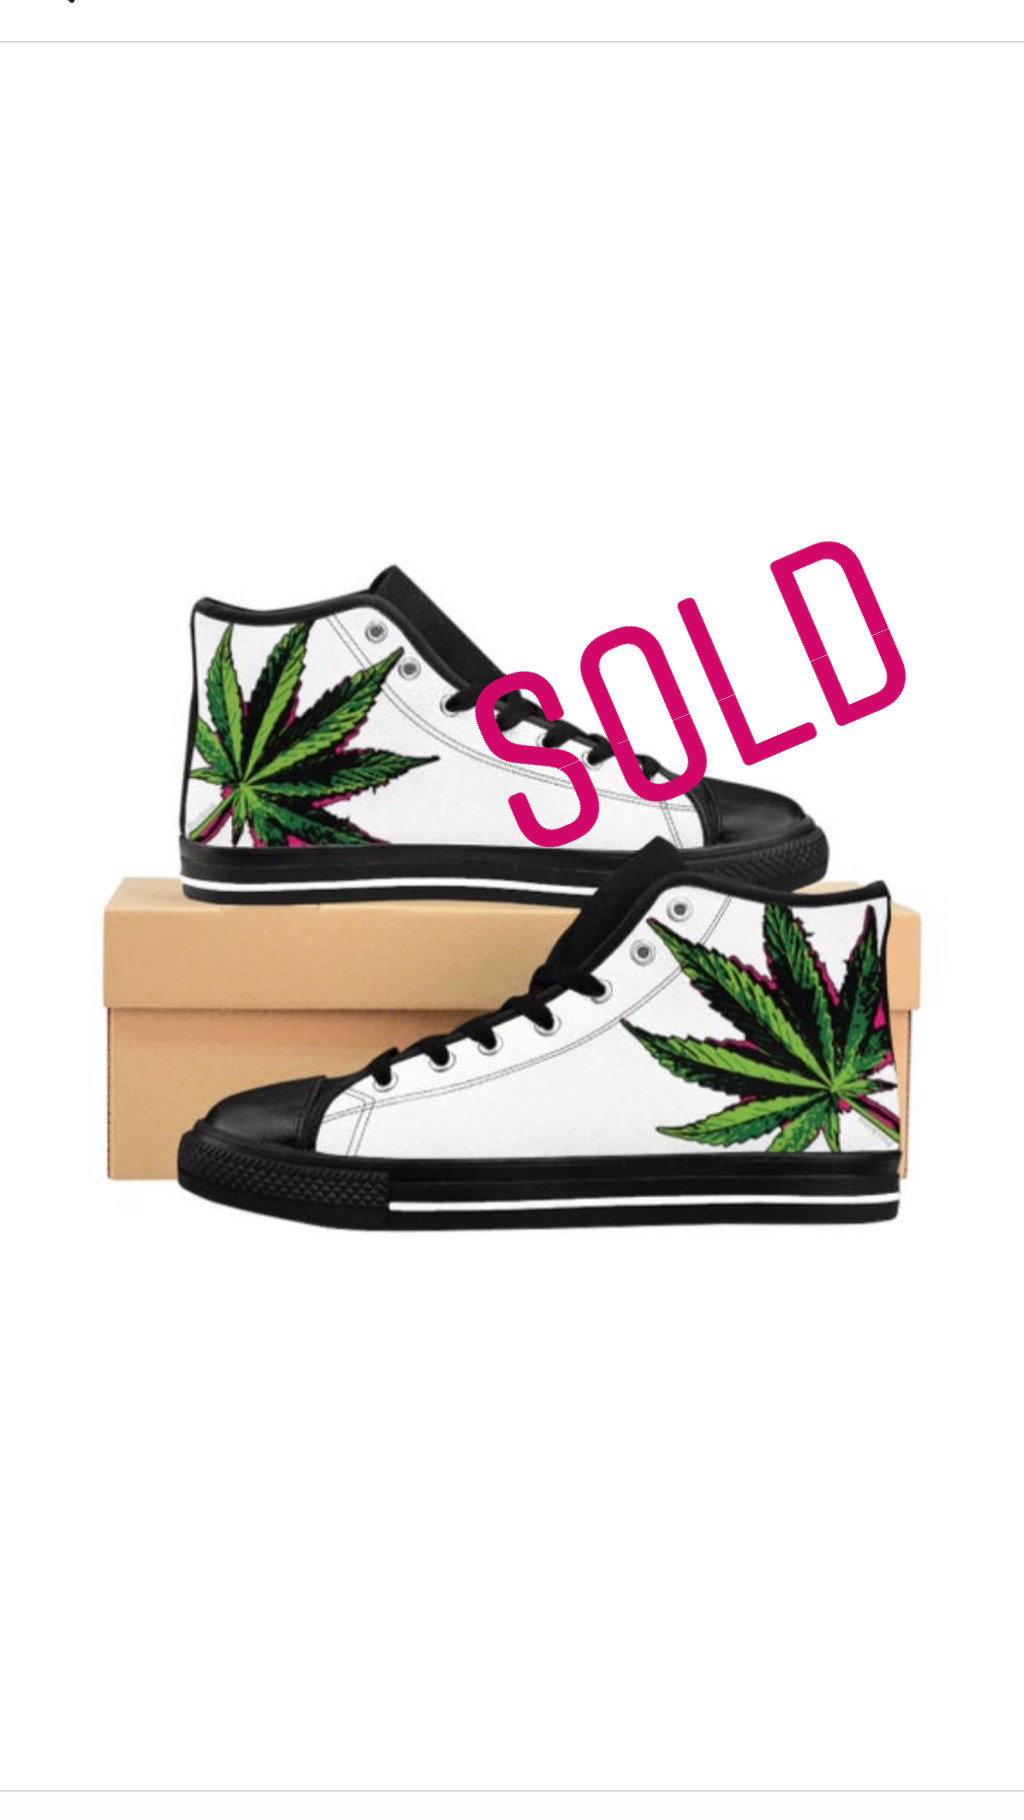 Photo by PolyAnnieStudios with the username @PolyAnnieStudios, who is a star user,  December 20, 2019 at 8:29 PM. The post is about the topic Cannabis and the text says 'check out my whole line of high top sneakers!! 
https://polyanniestudios.patternbyetsy.com/shop/27038706/hi-tops'